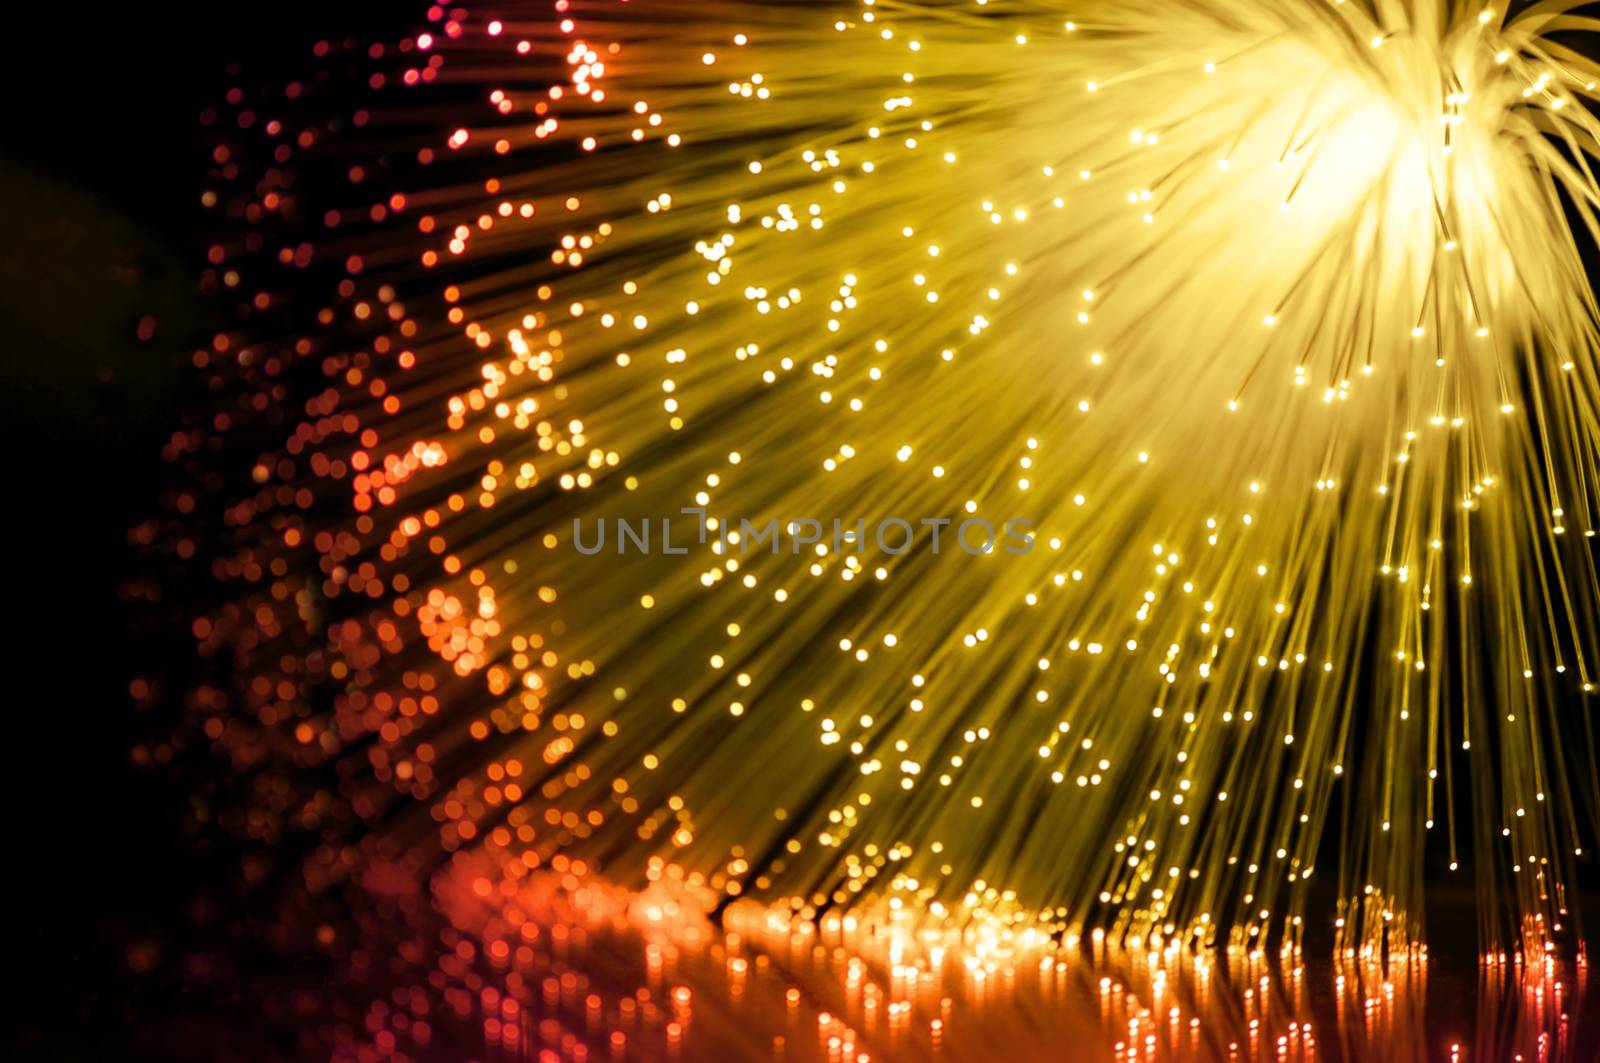 Abstract golden and red fiber optic scene arranged over black.